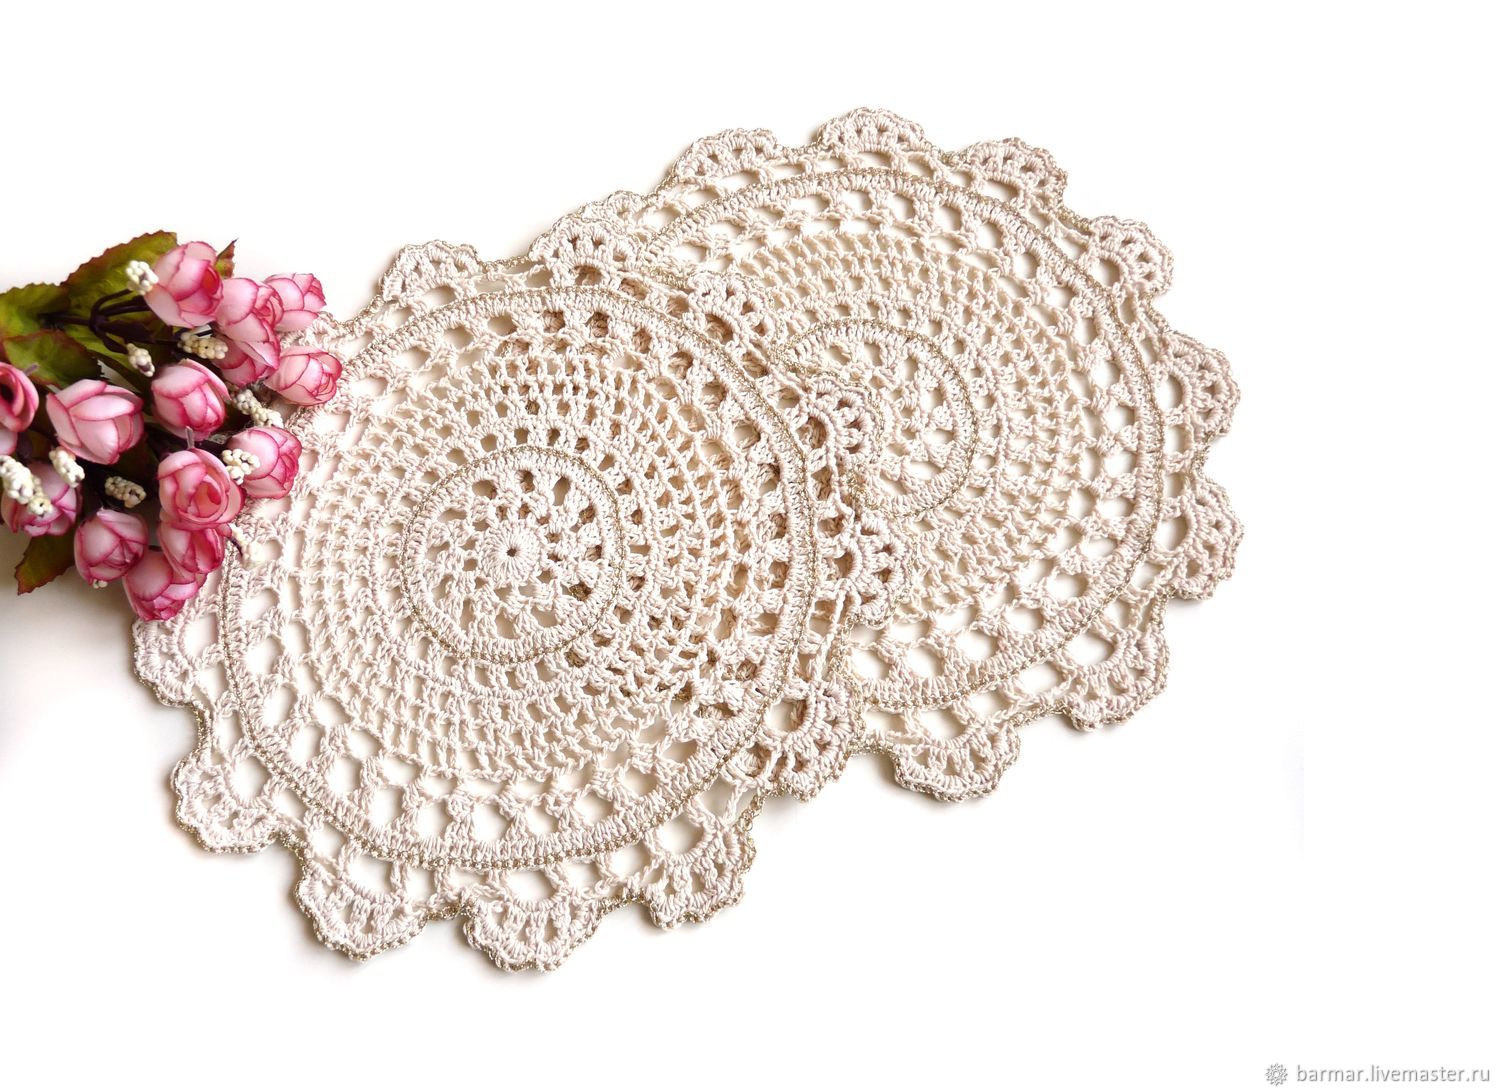 Beige knitted napkin for plates 24 cm, Hot stand, Moscow,  Фото №1